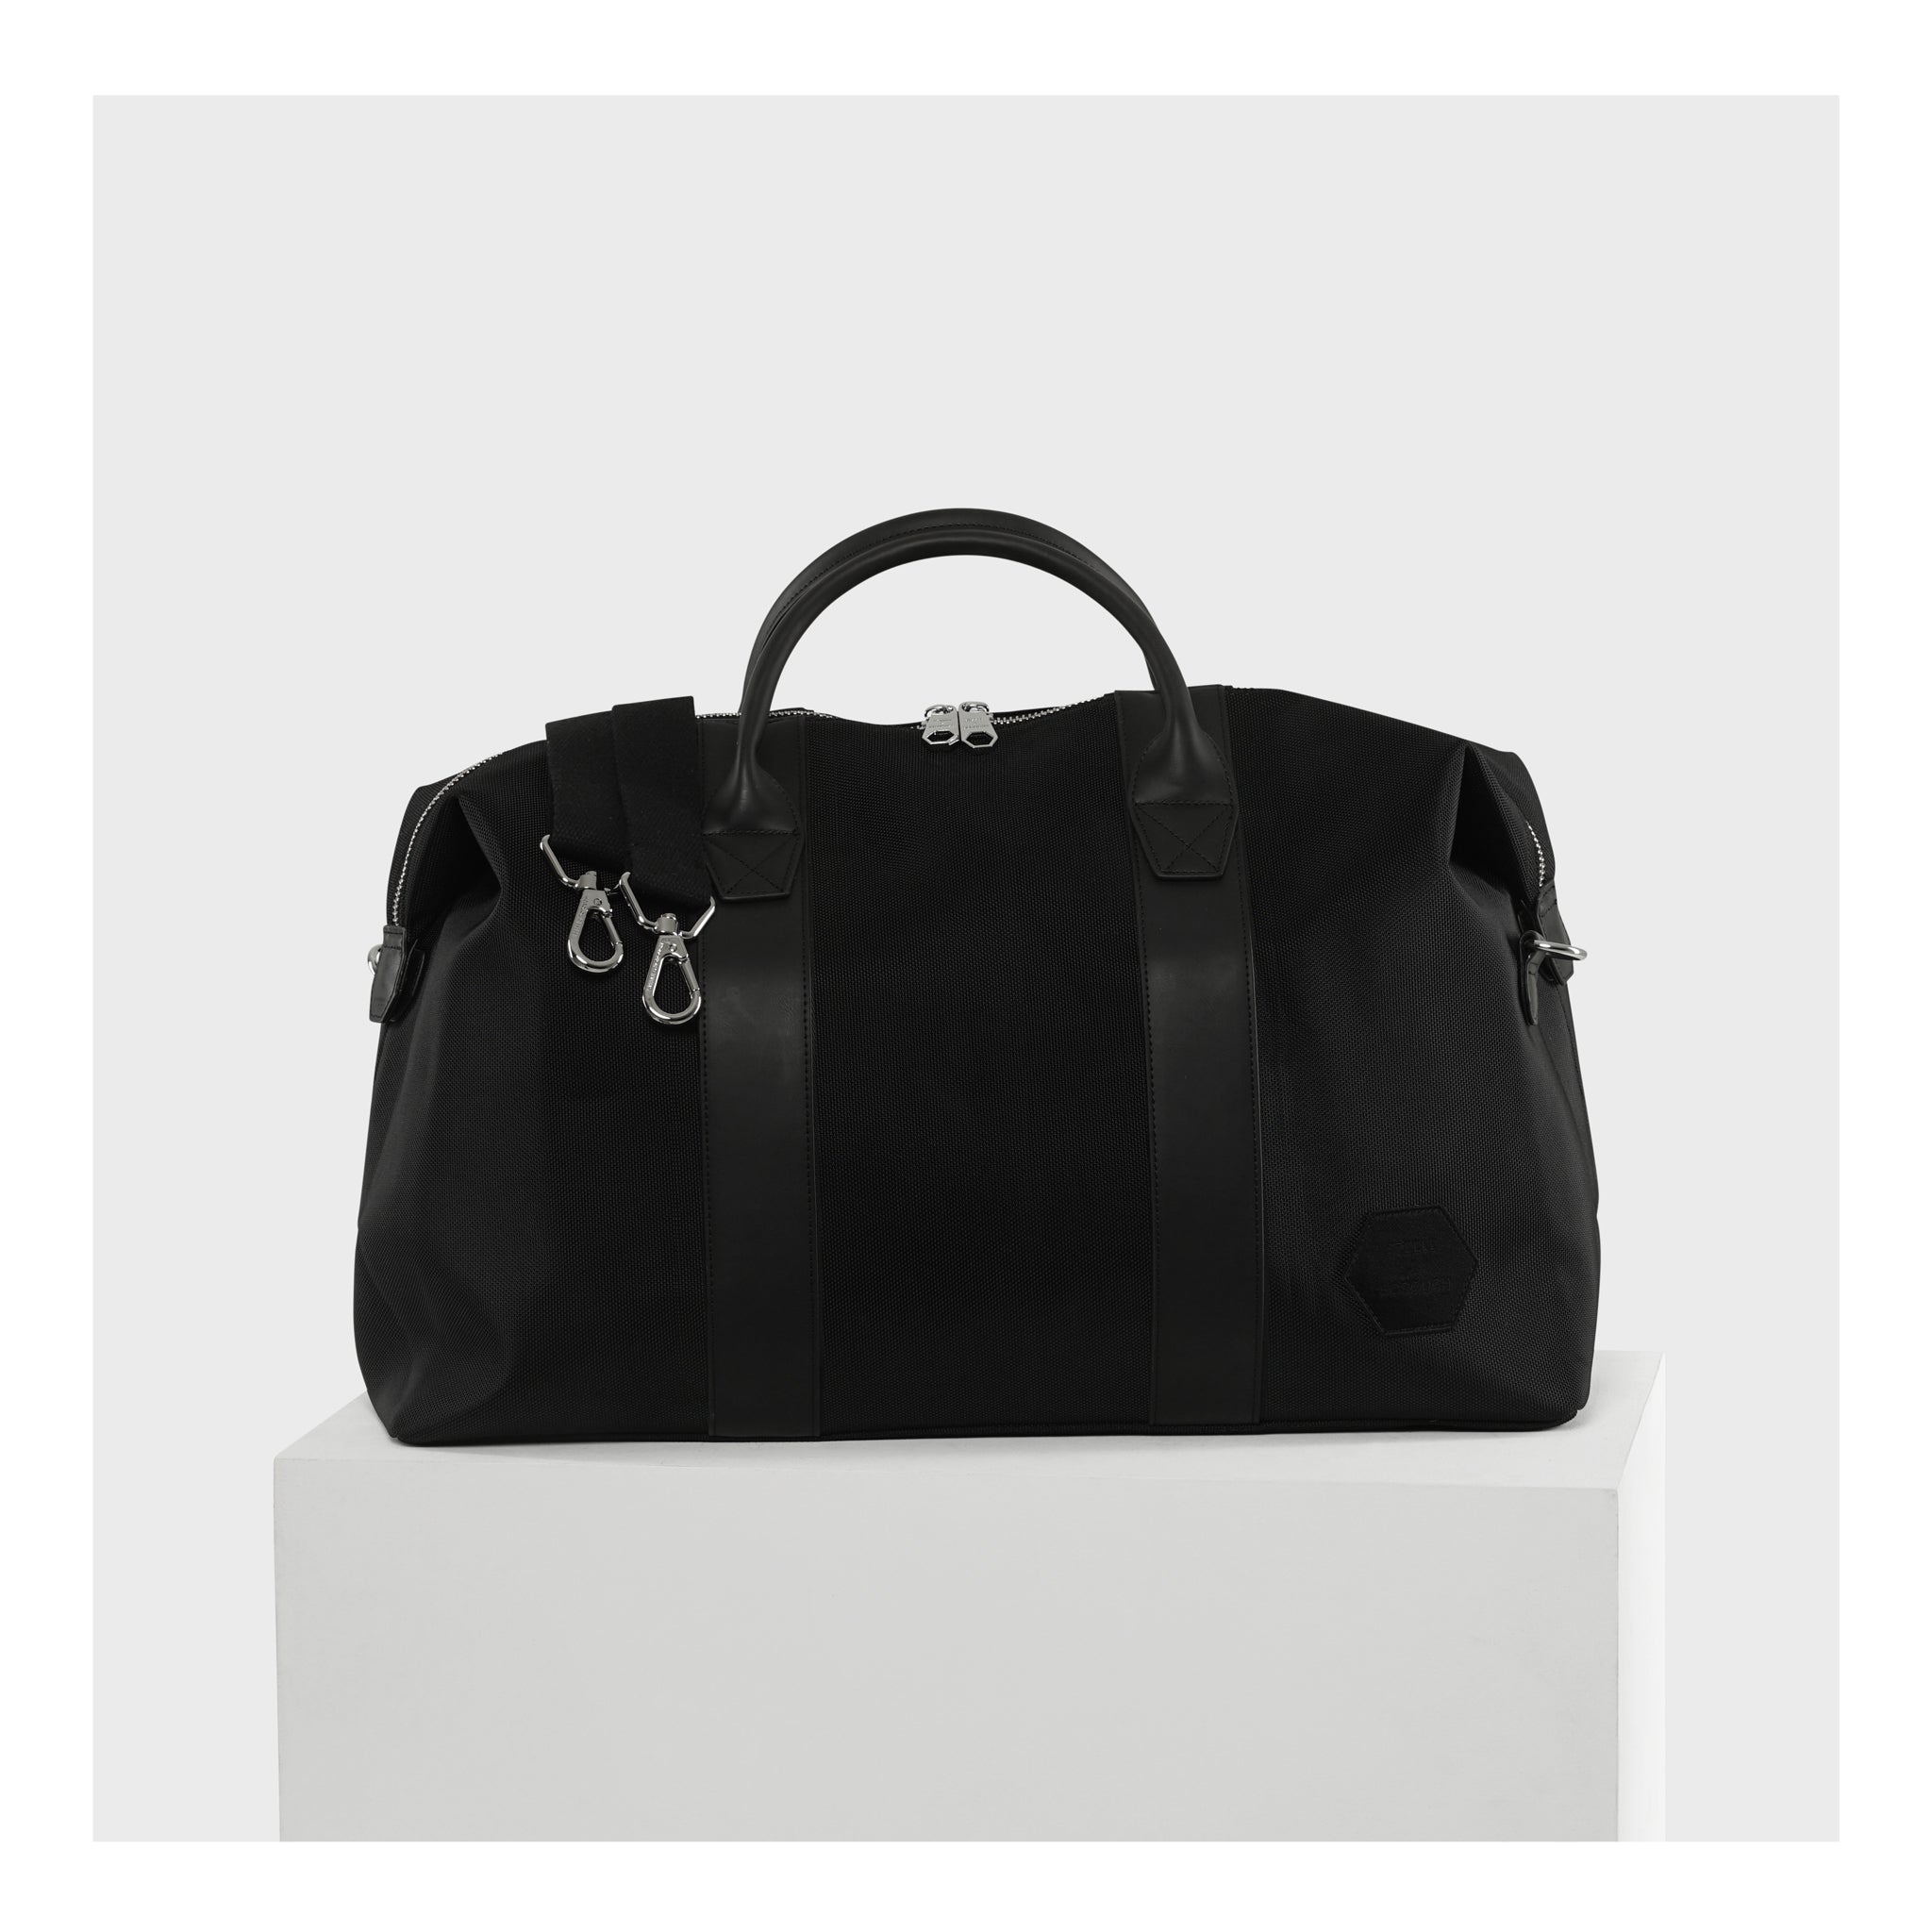 "Black Weekend Bag elegantly presented on a podium, perfect for discerning travelers who value sophistication